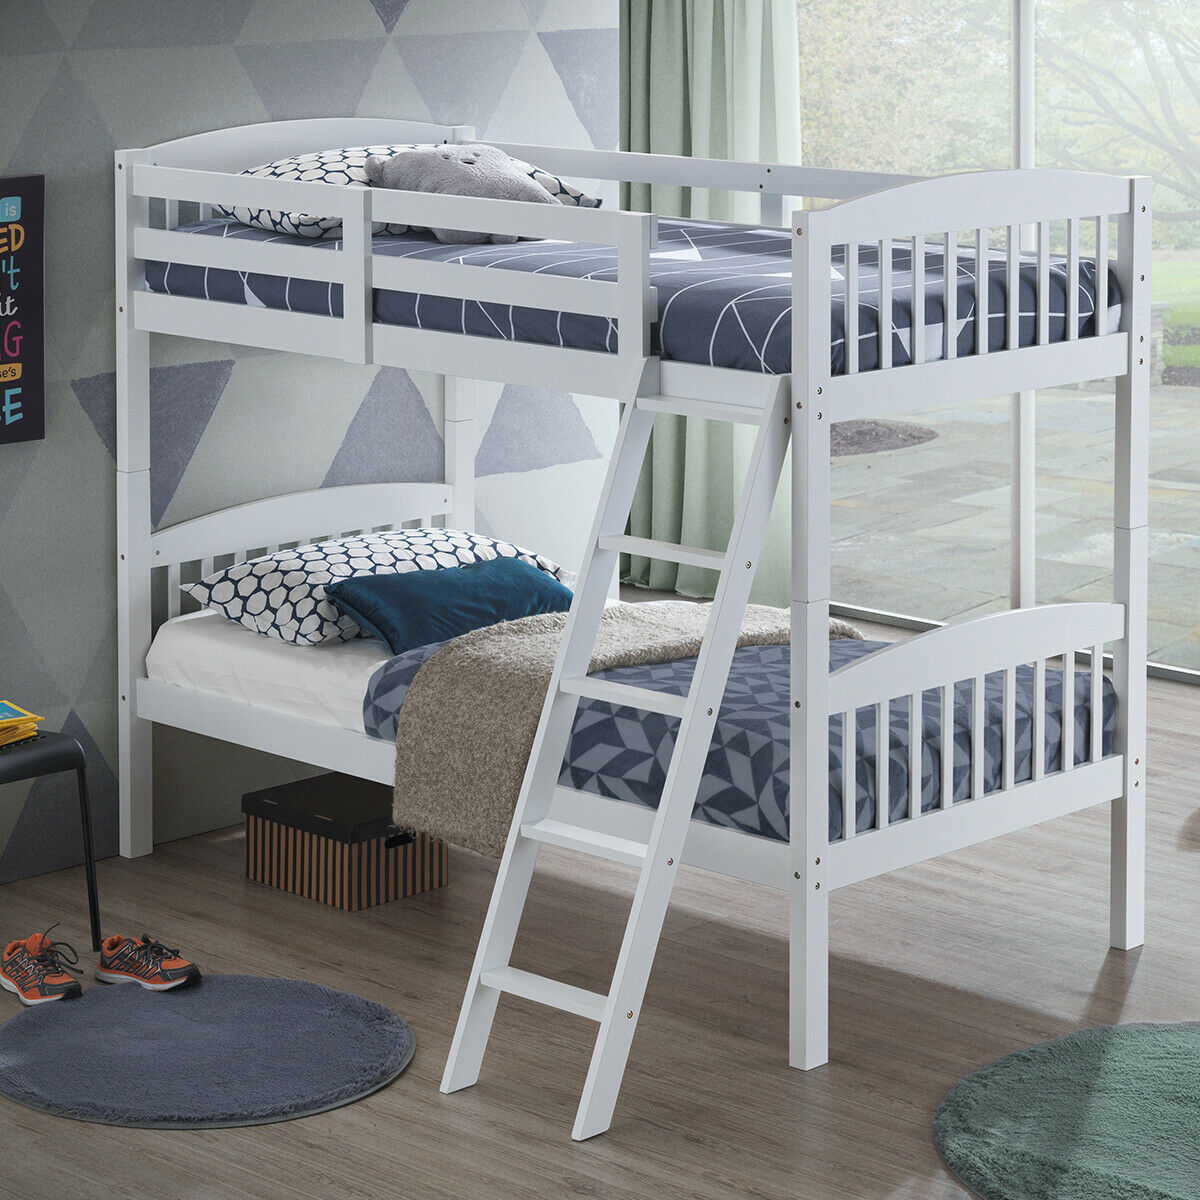 Costway Wood Hardwood Twin Bunk Beds, White Bunk Bed Ladder